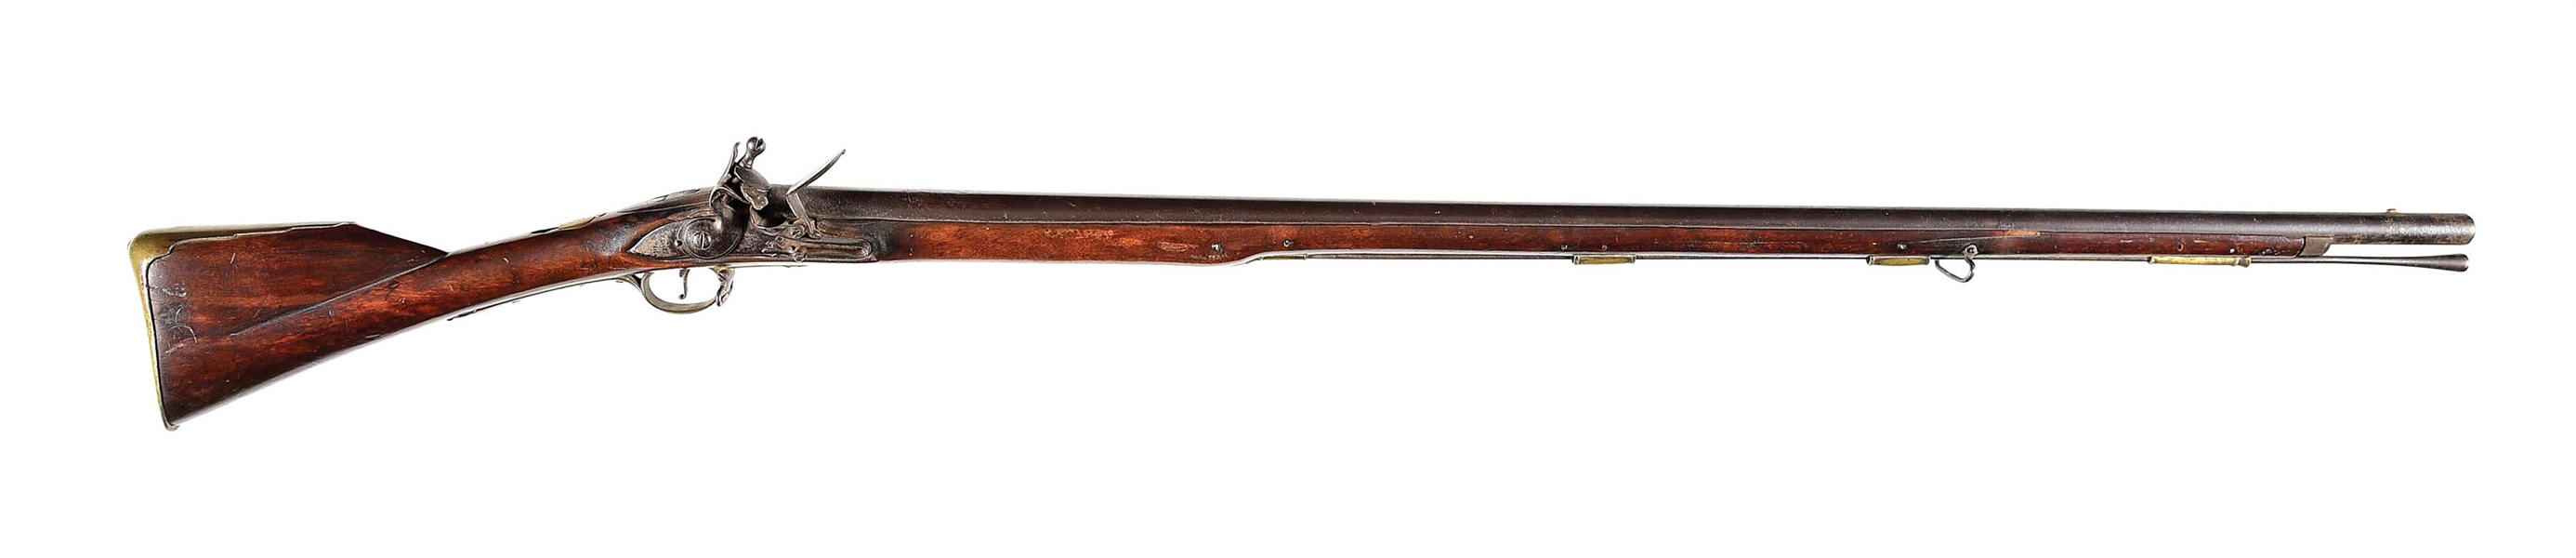 (A) AMERICAN STOCKED 23RD ROYAL WELSH FUSILIERS MARKED FLINTLOCK MUSKET